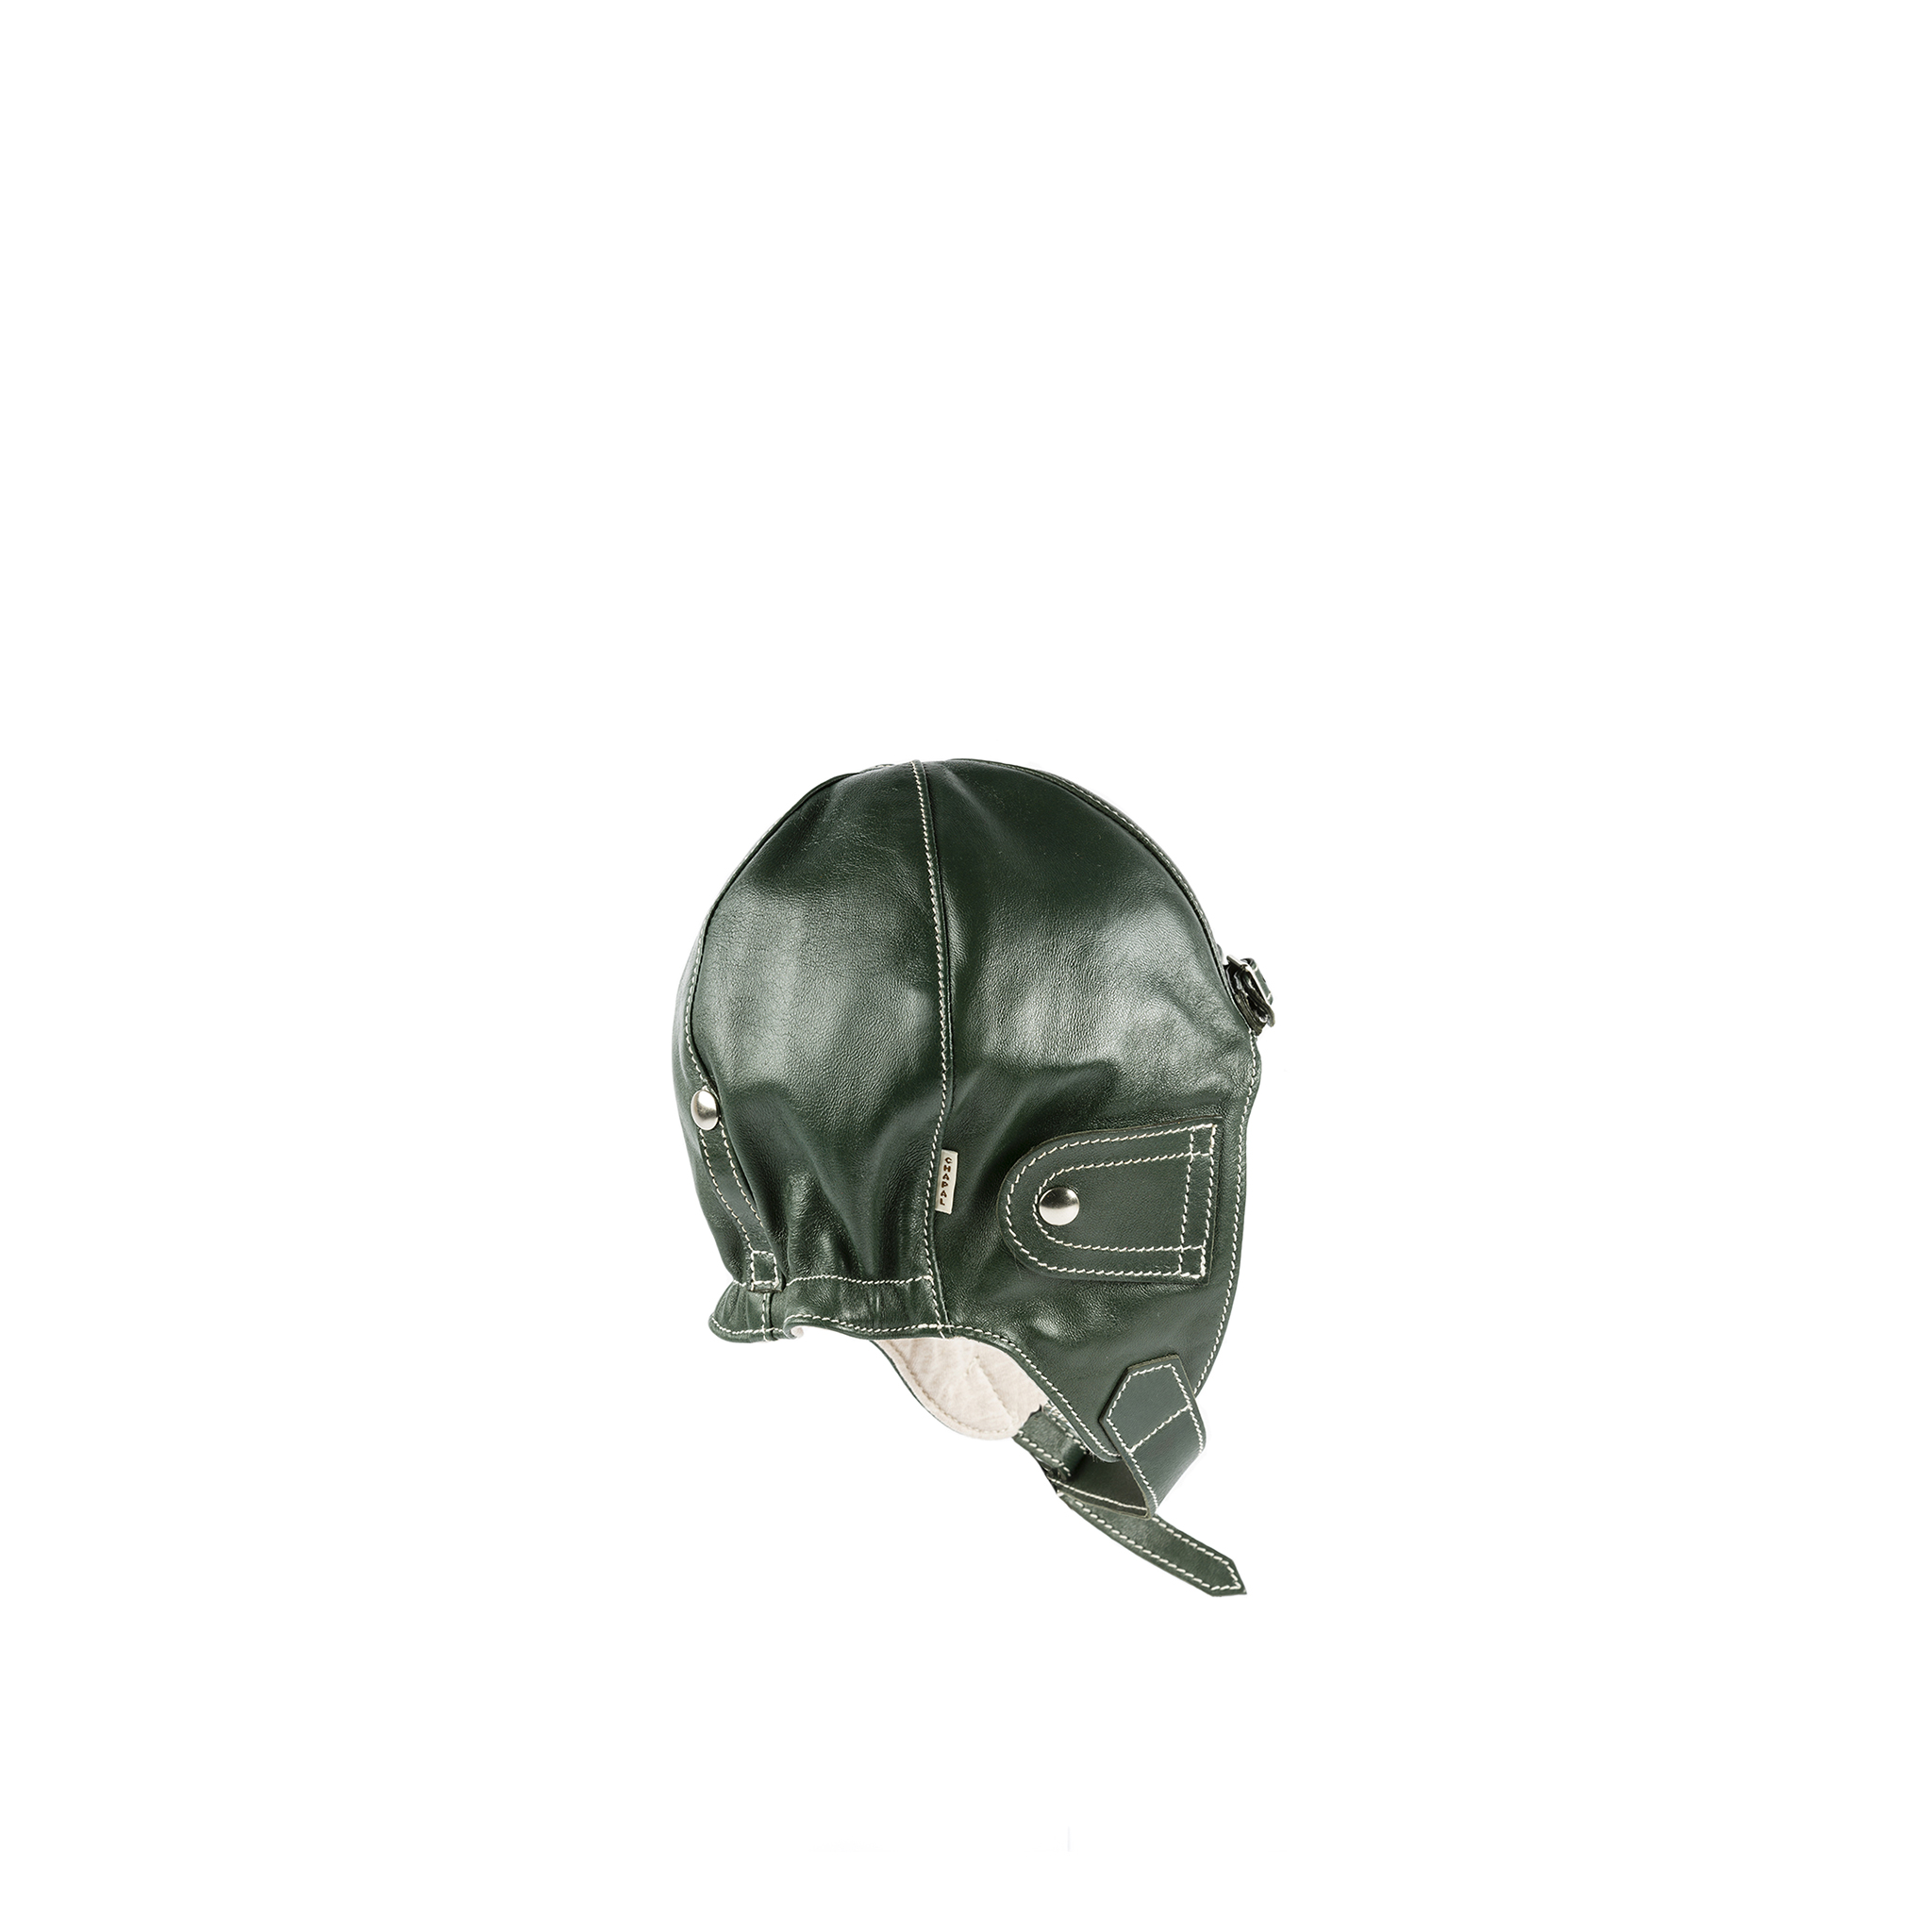 Driver Helmet - Glossy leather - Green color